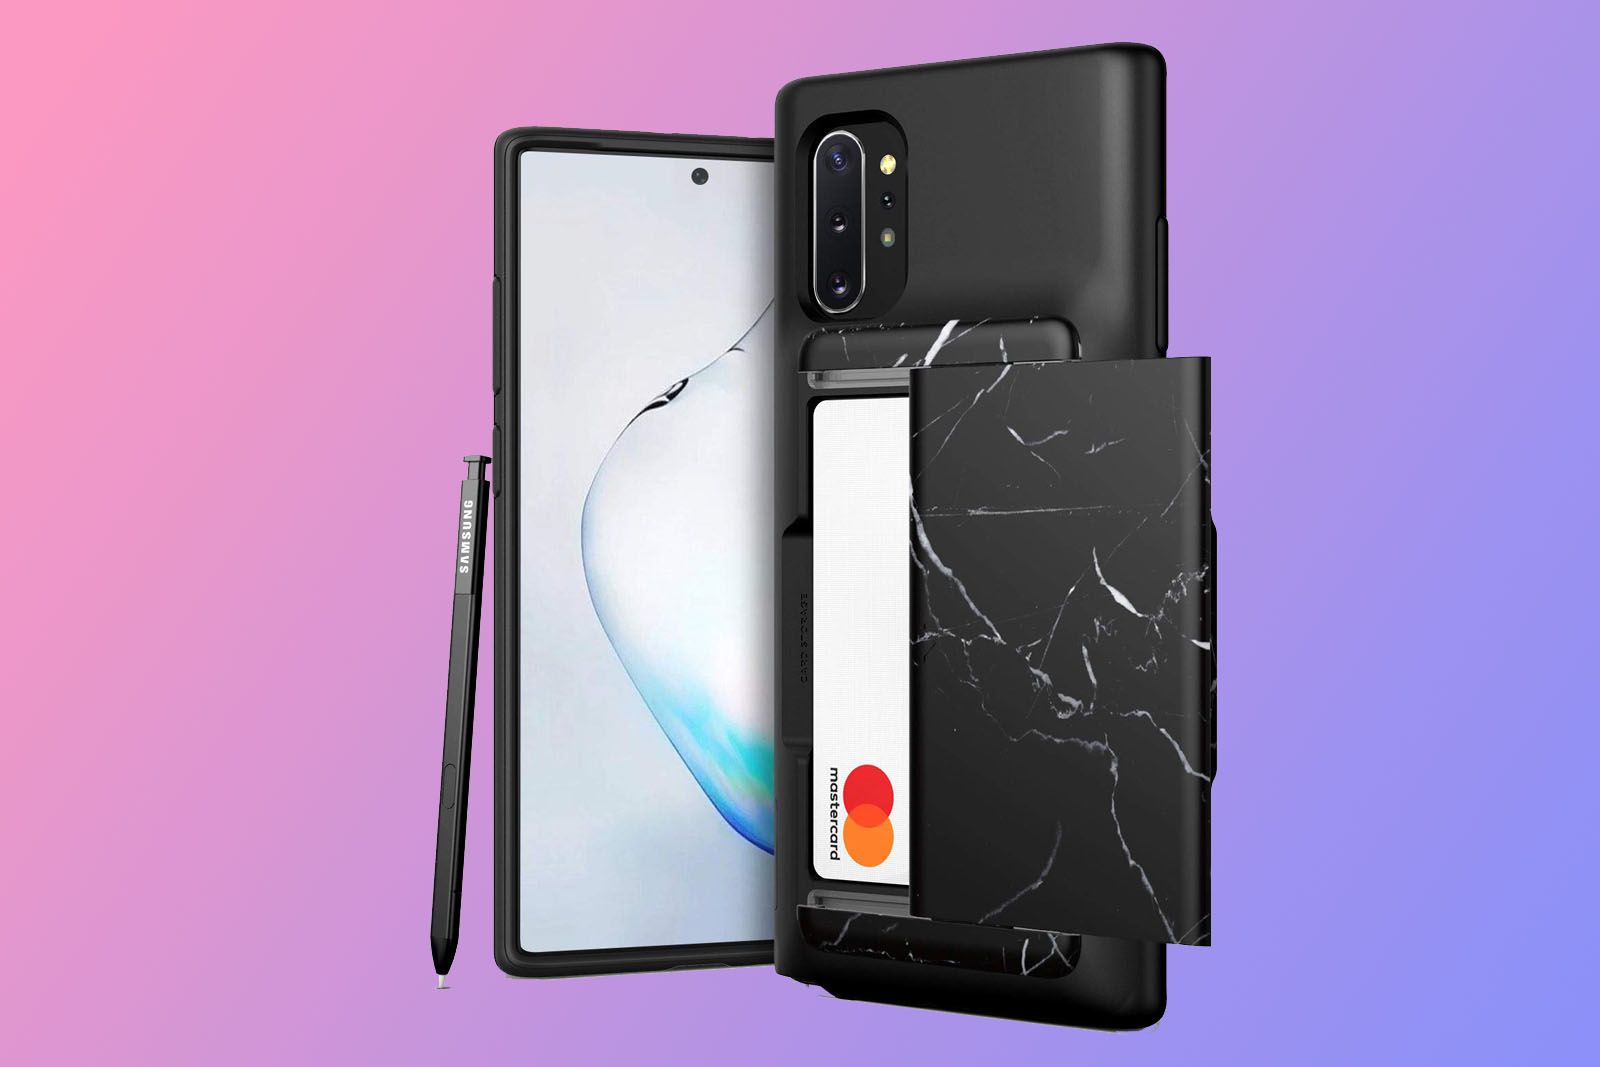 Best Note 10 And Note 10 Cases Protect Your New Samsung Phone image 12